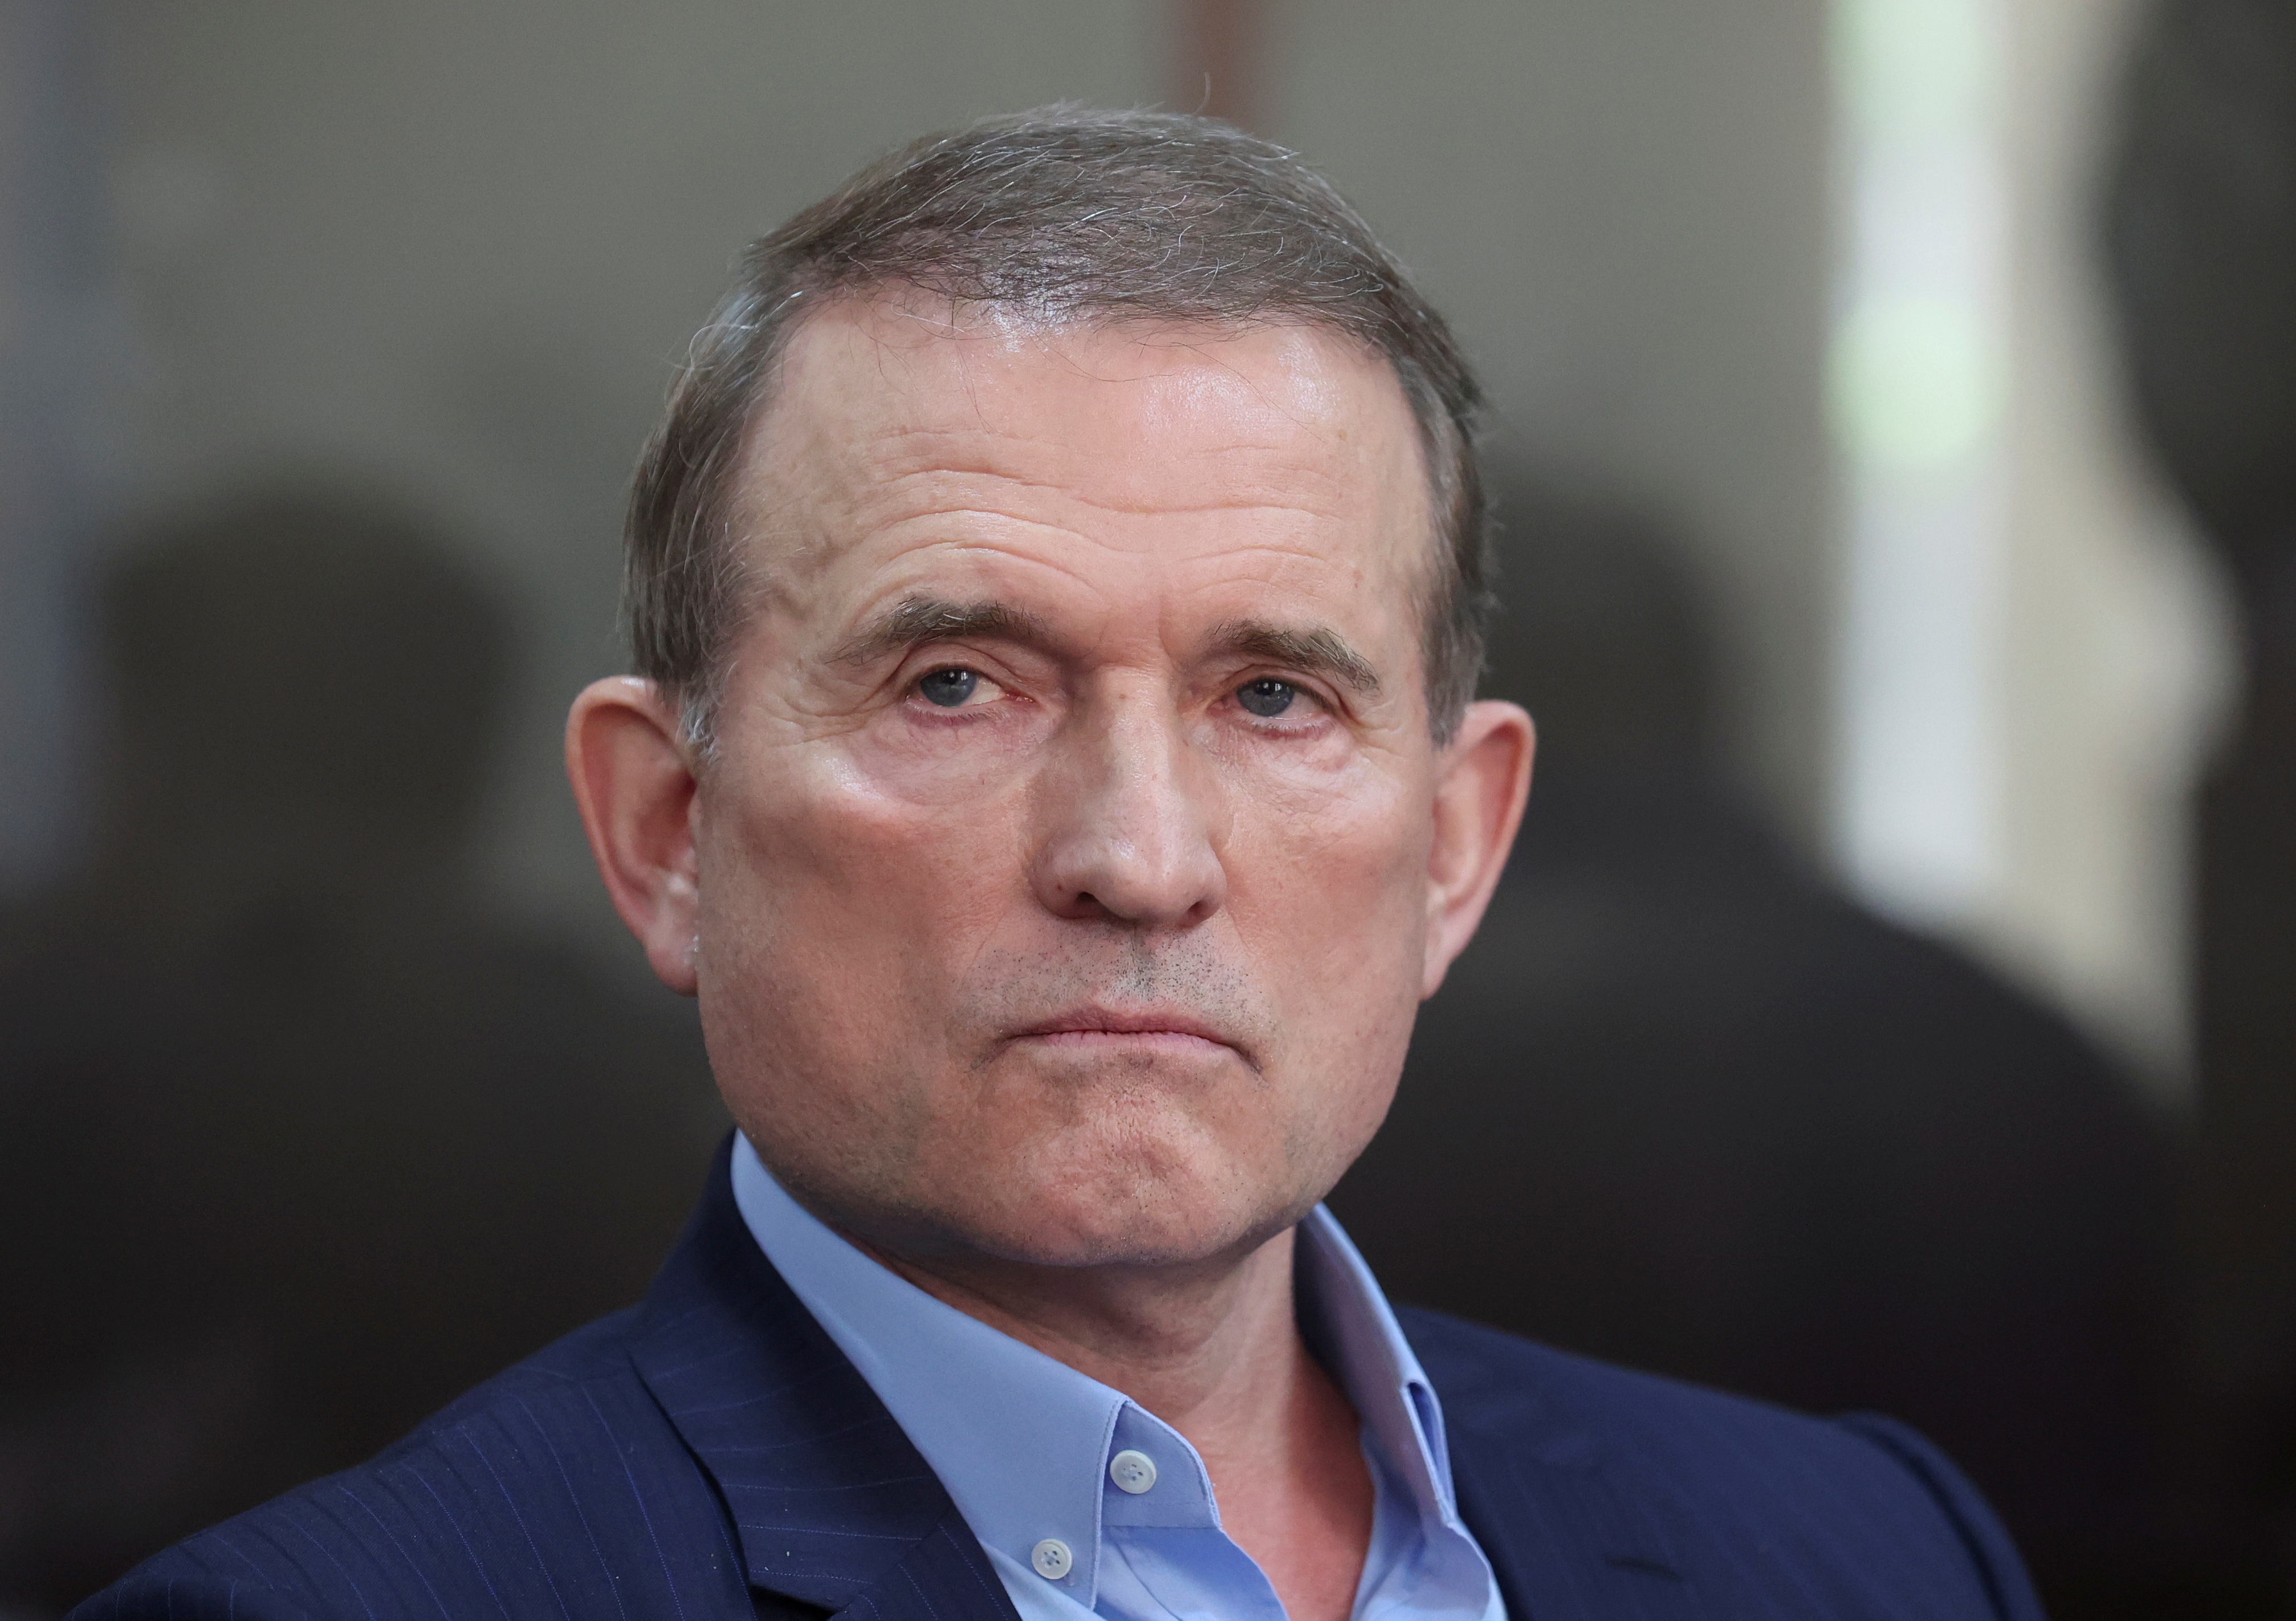 Viktor Medvedchuk, leader of Opposition Platform - For Life political party, attends a court hearing in Kyiv